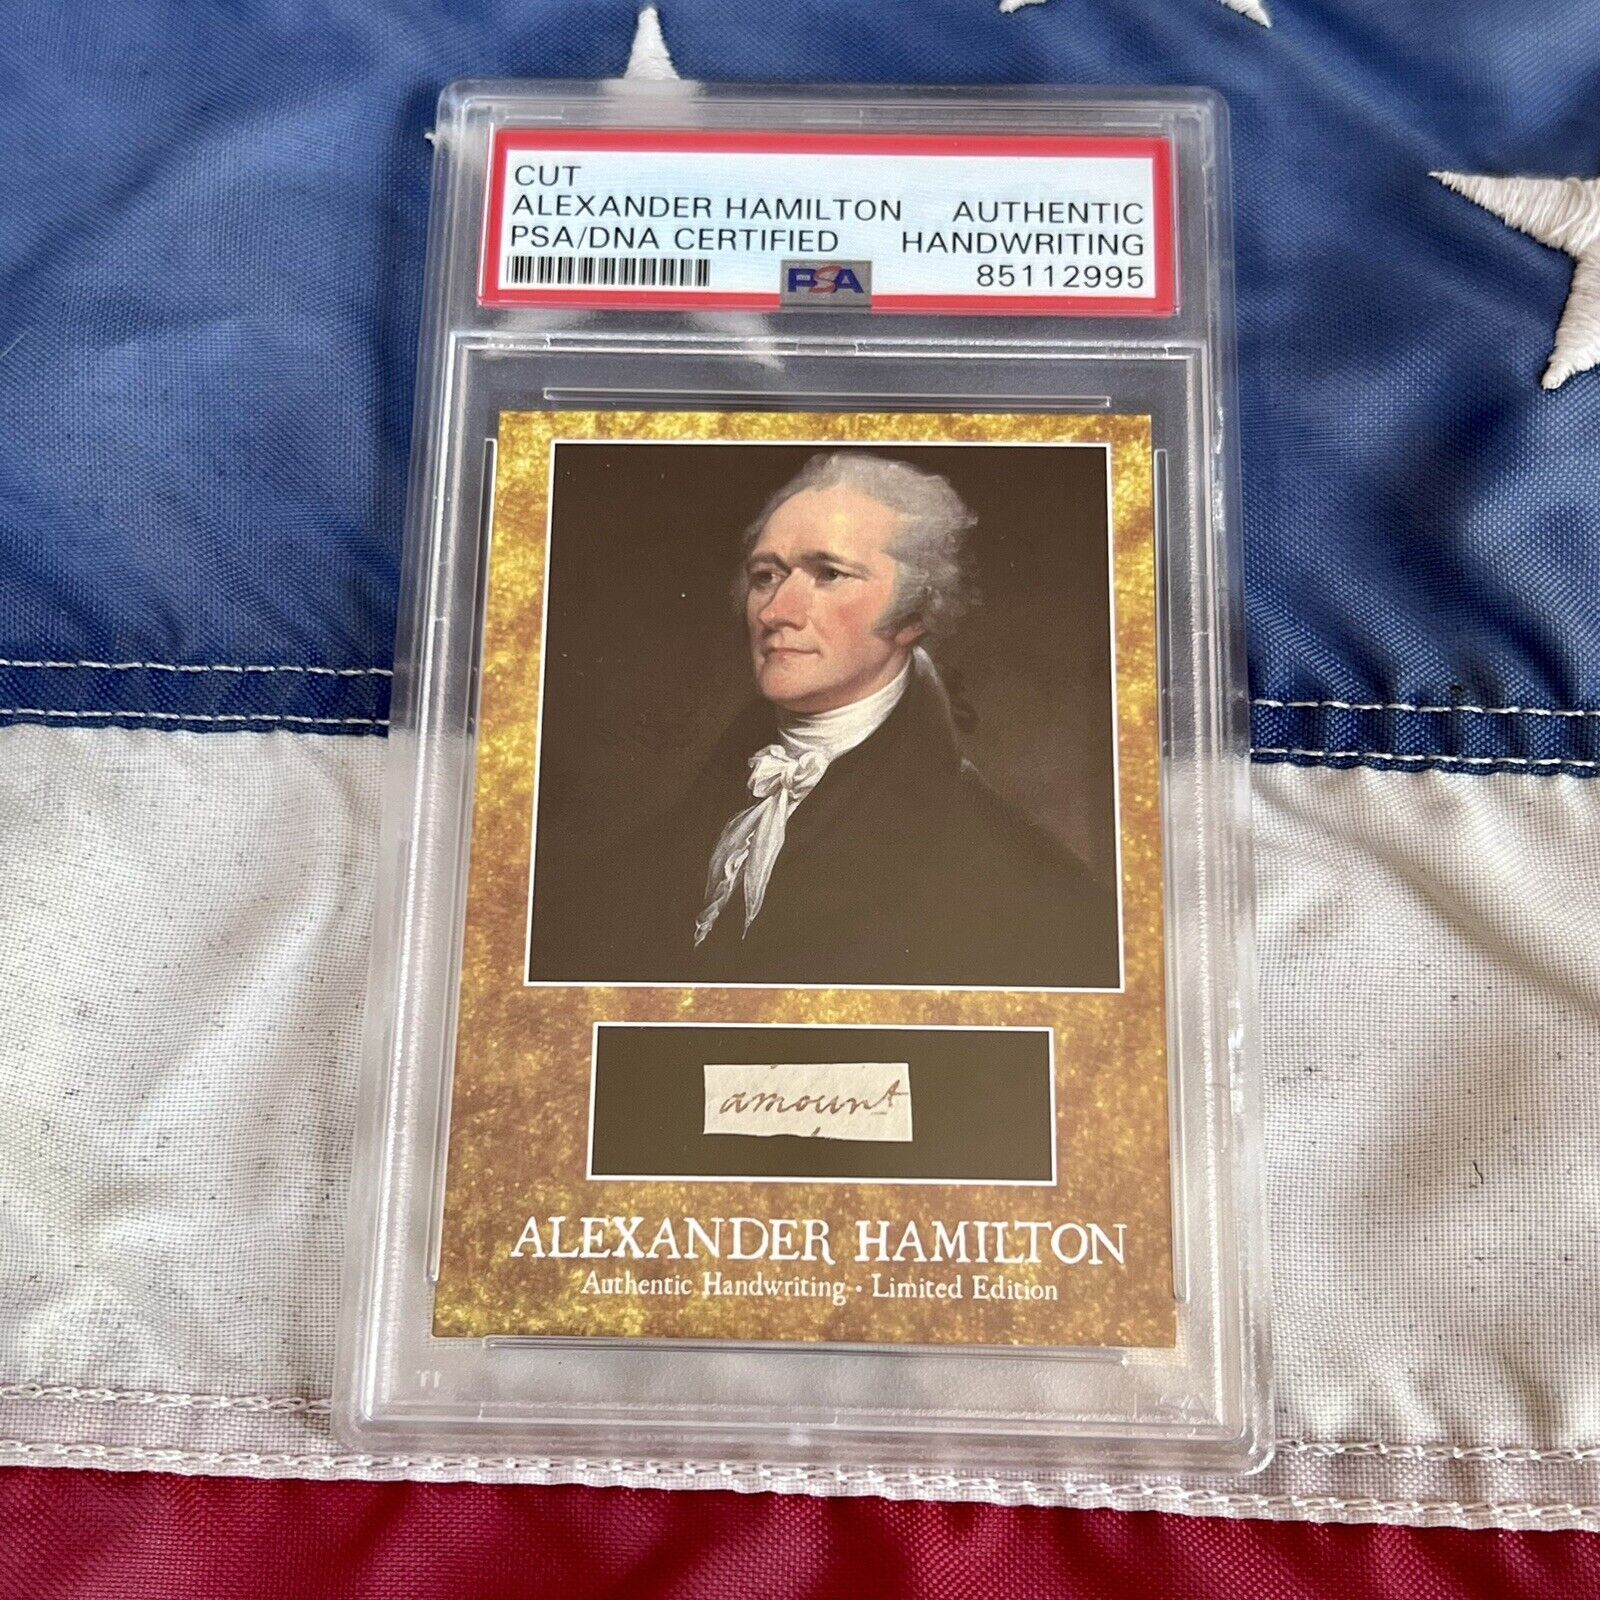 Alexander Hamilton Handwritten Word Removed From a PSA Autograph Signed Letter